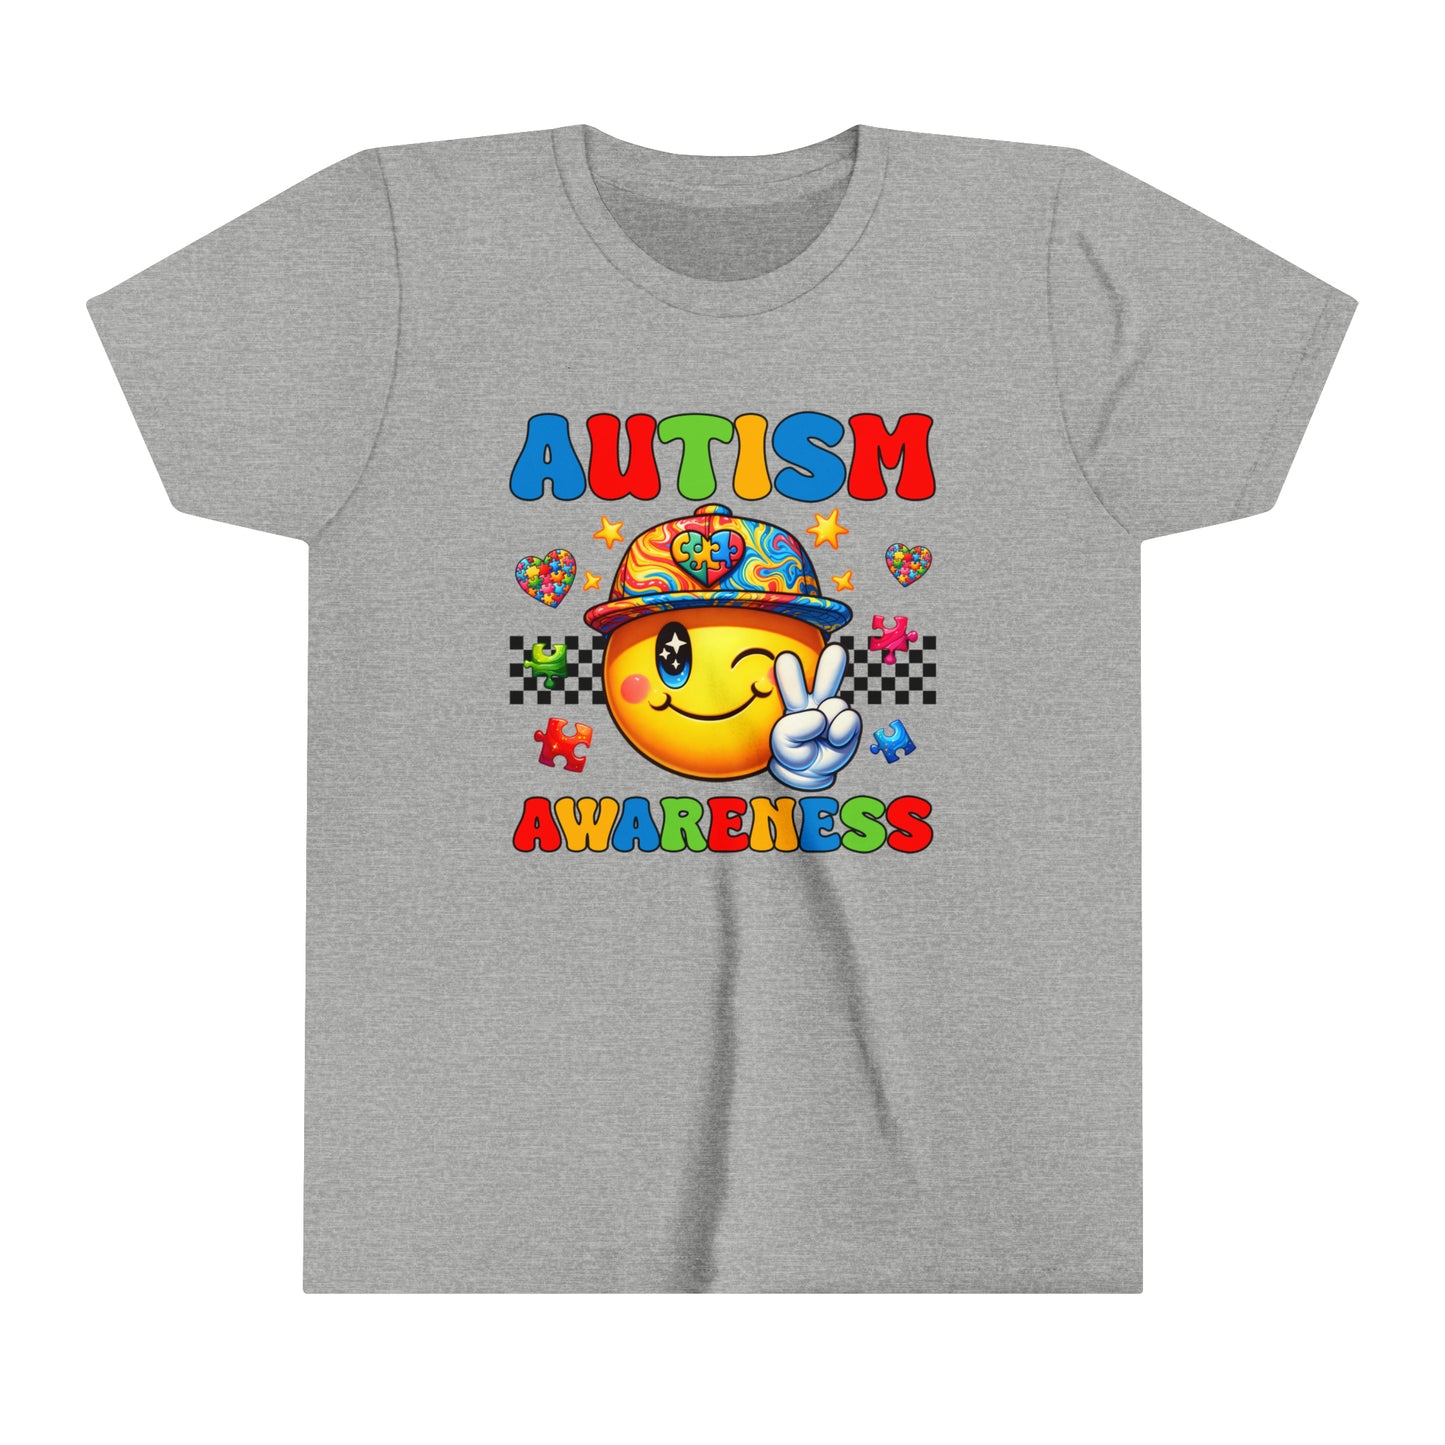 Think Before You Judge Autism Advocate Youth Shirt